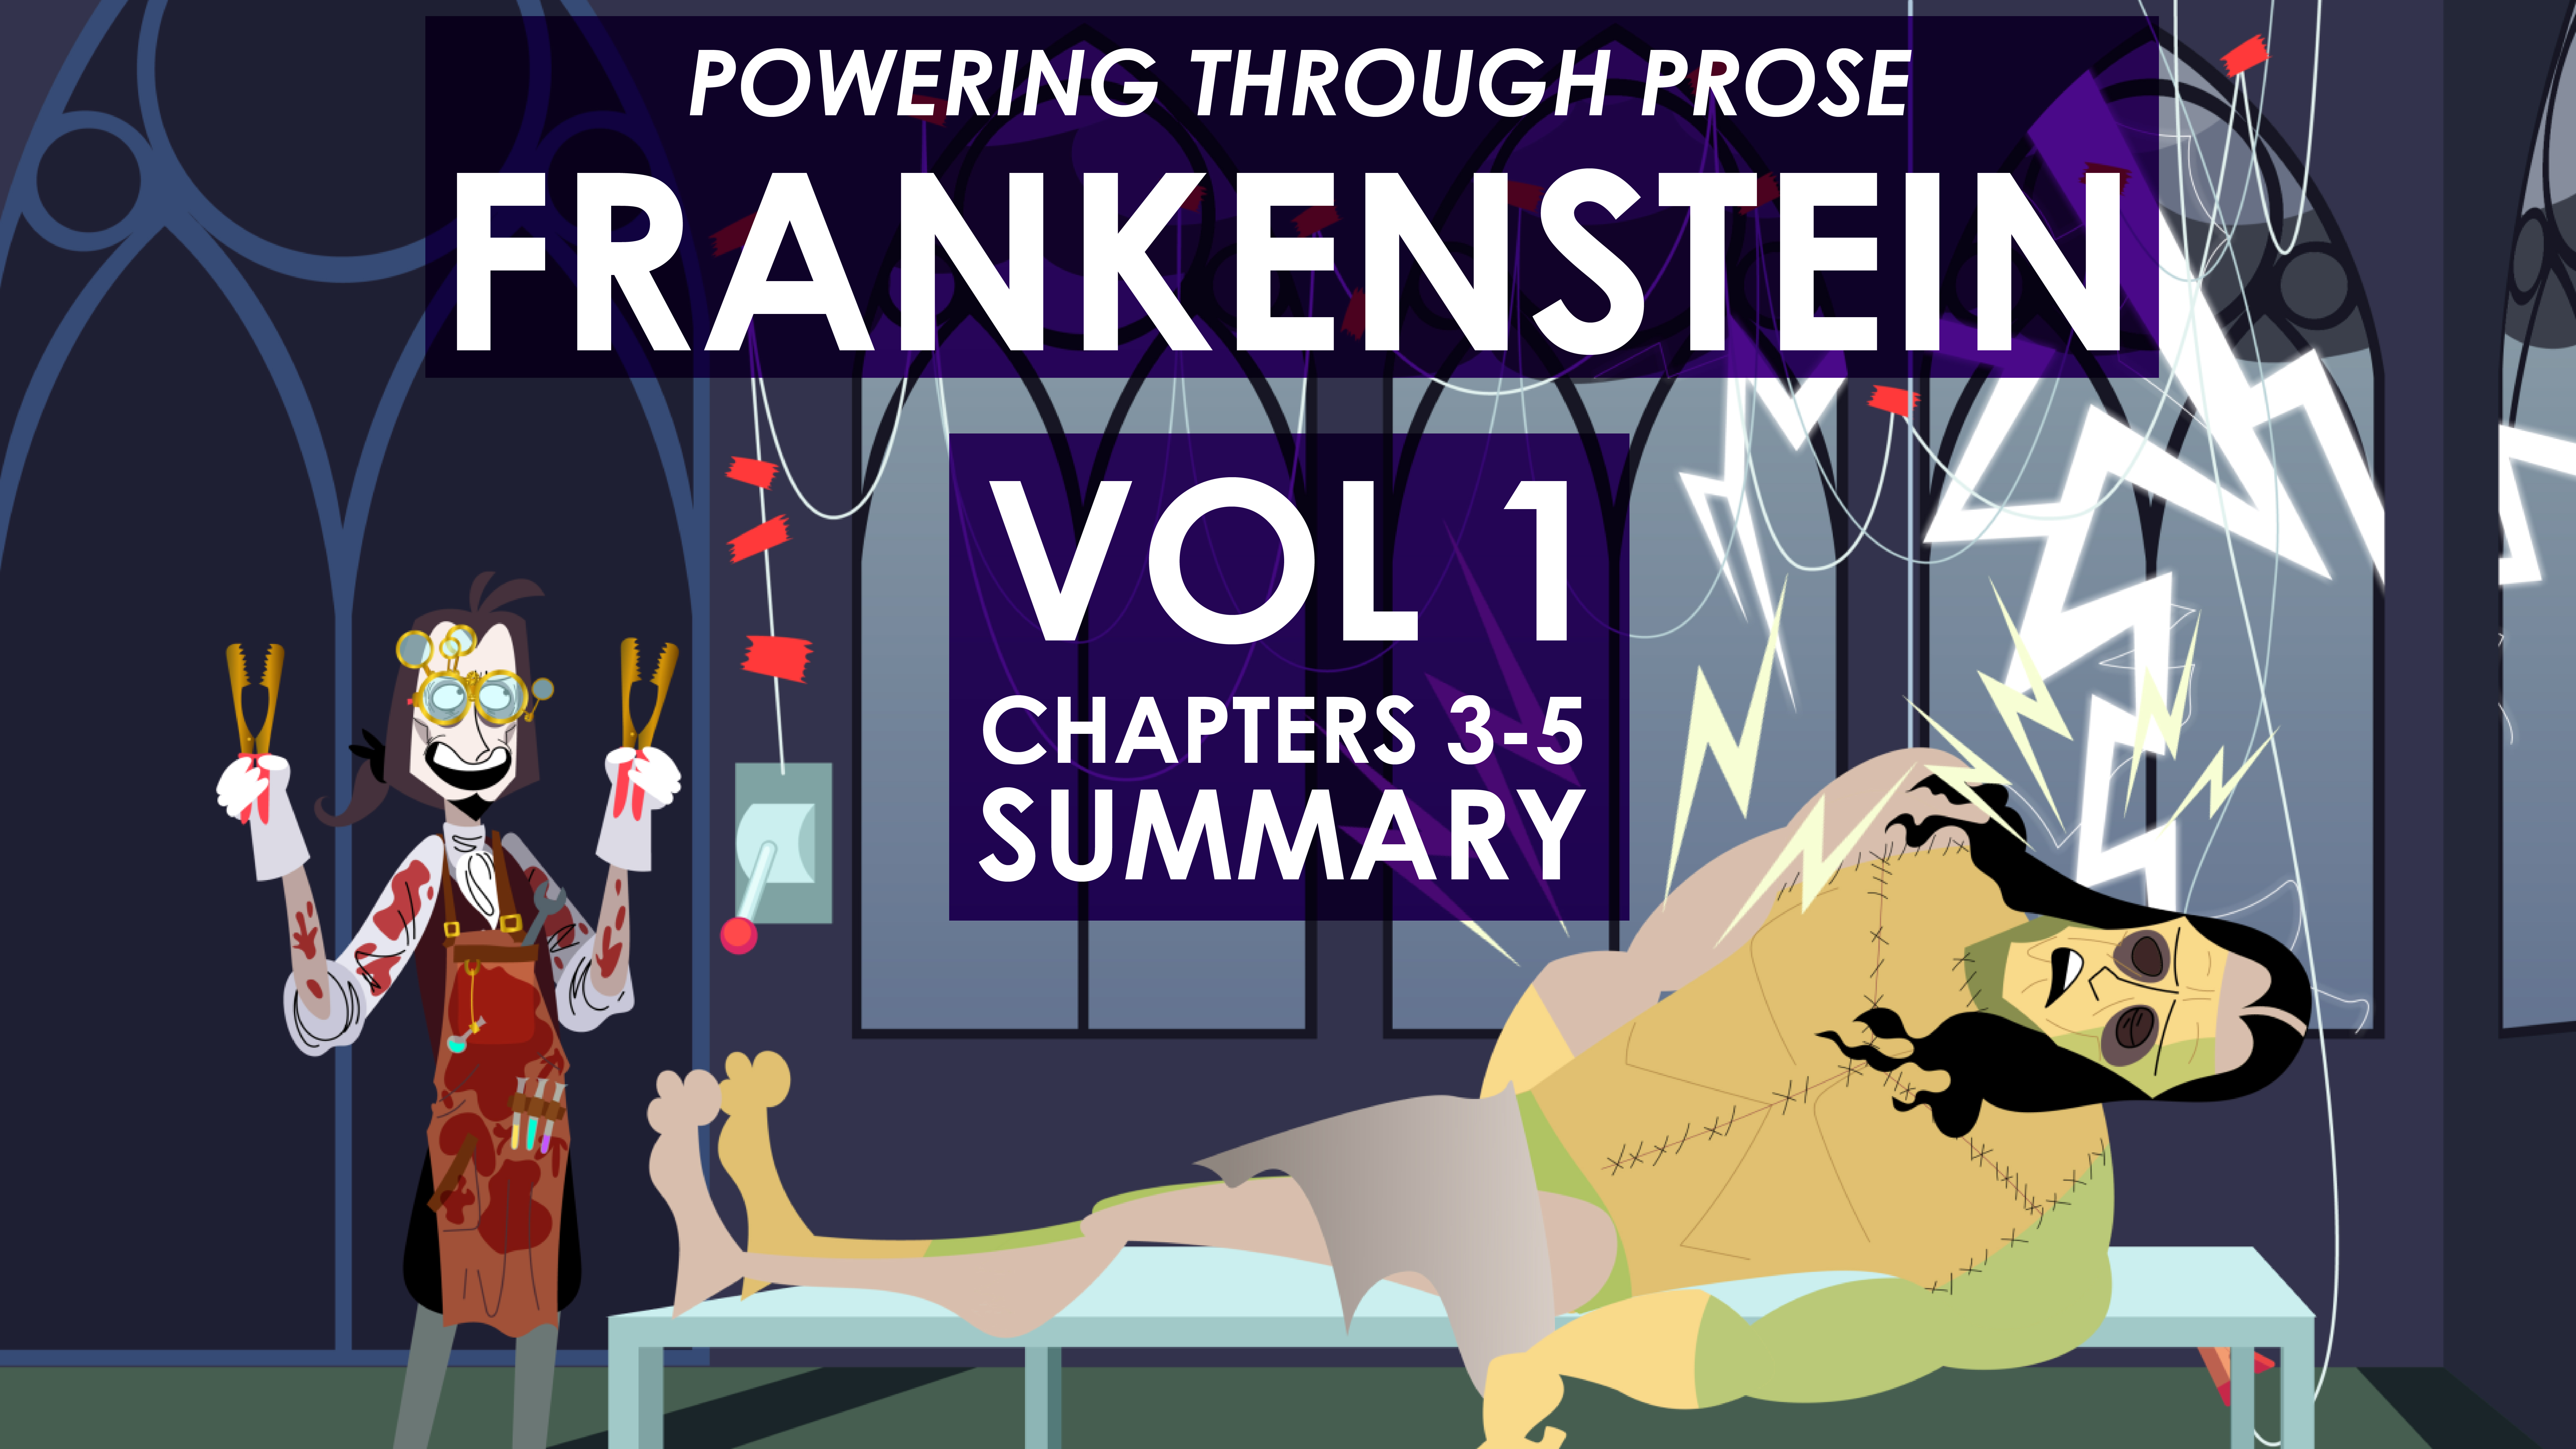 Frankenstein - Mary Shelley - Volume 1, Chapters 3-5 - Powering Through Prose Series	